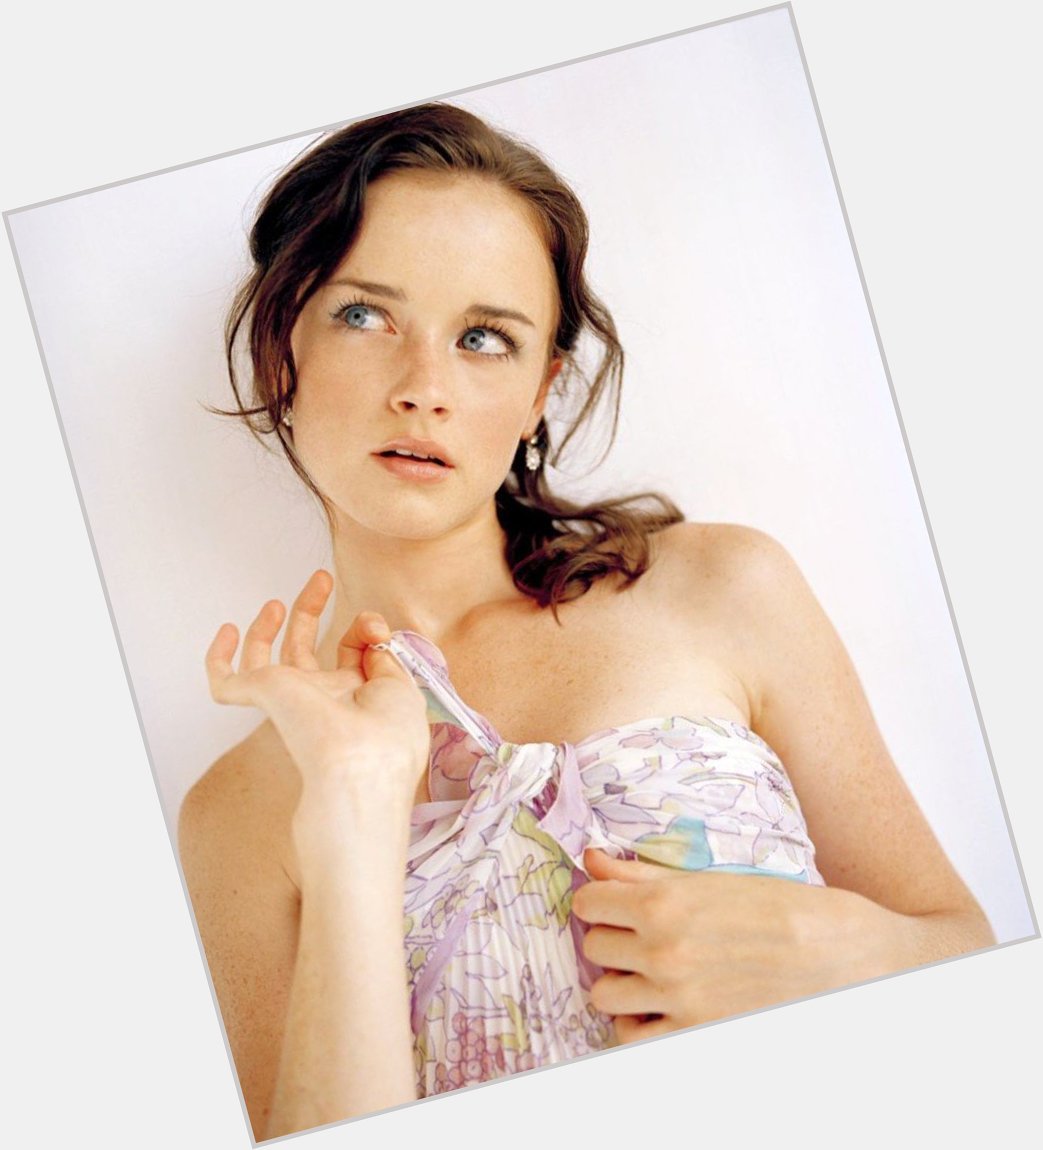 Happy Birthday to Alexis Bledel who turns 38 today! 